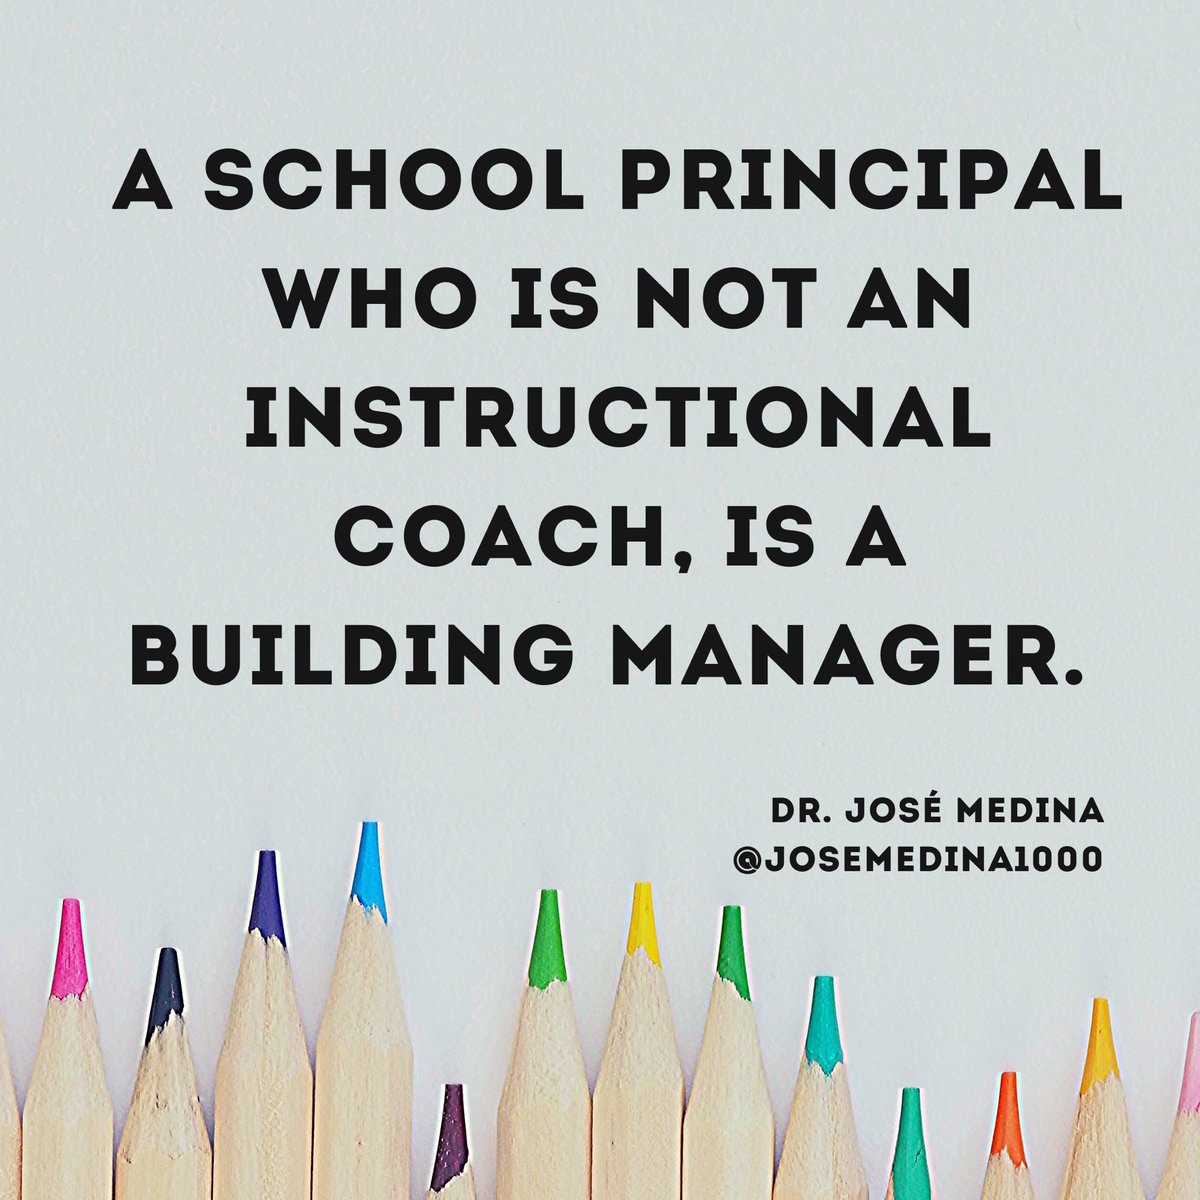 #Principals and #assistantprincipals, let’s get into #classrooms and teach!! It can be done!  #leadership #leadershipmatters #leader #leaders #LeadershipDevelopment #educationalleadership